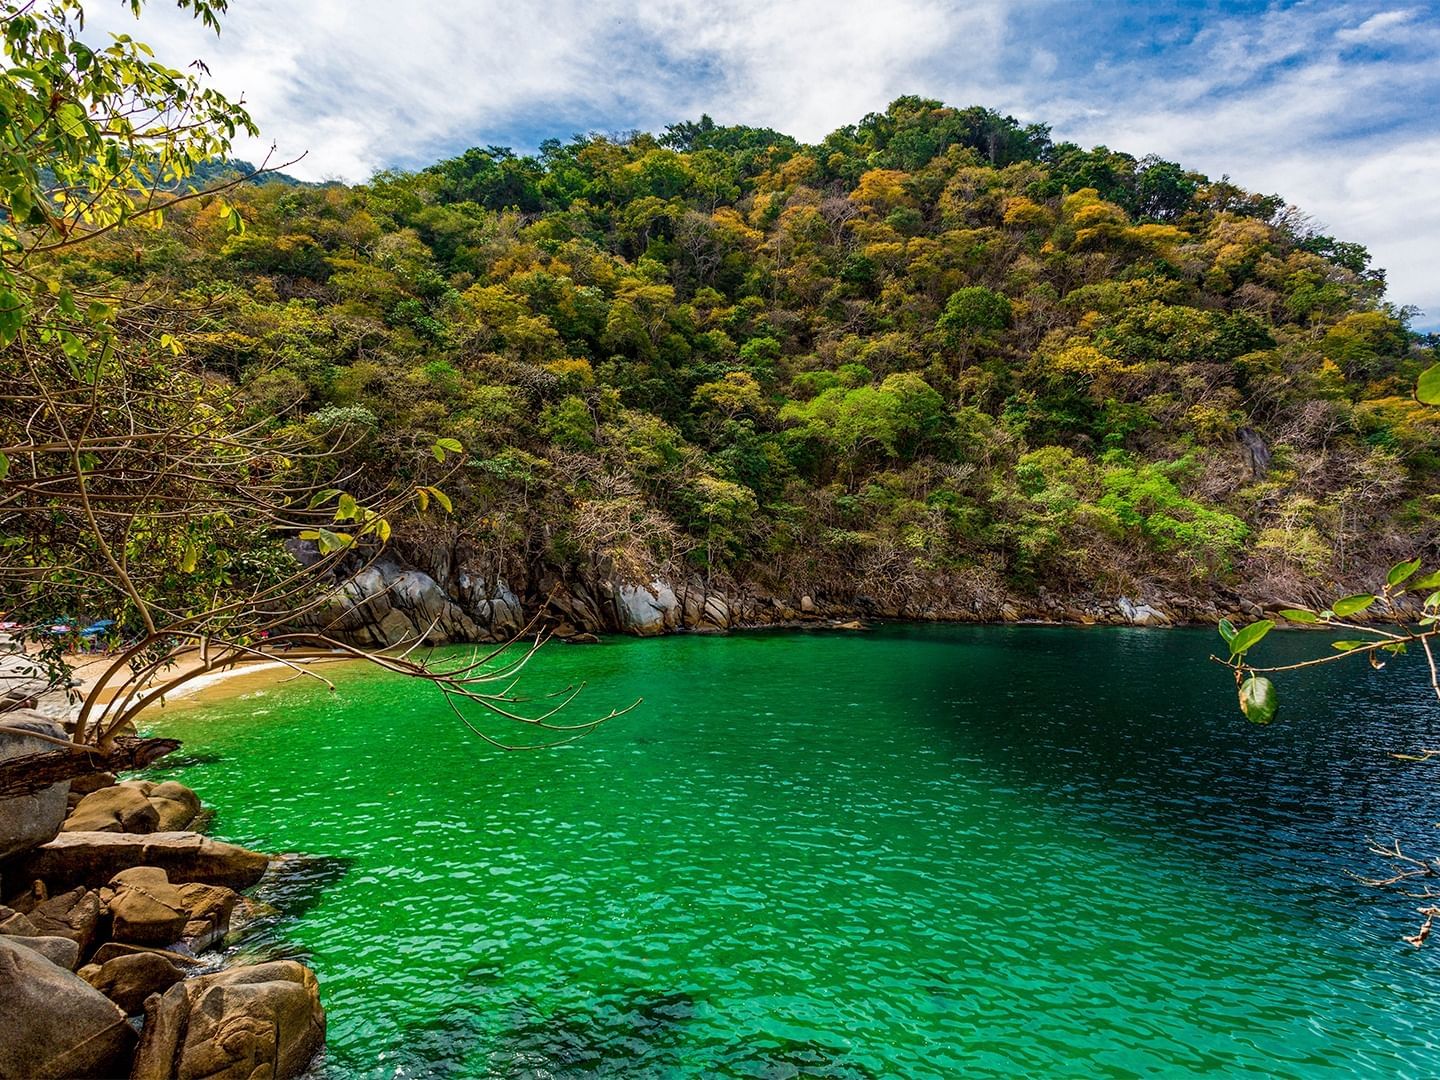 Colomitos Beach with emerald water and rocky formations near Plaza Pelicanos Club Beach Resort